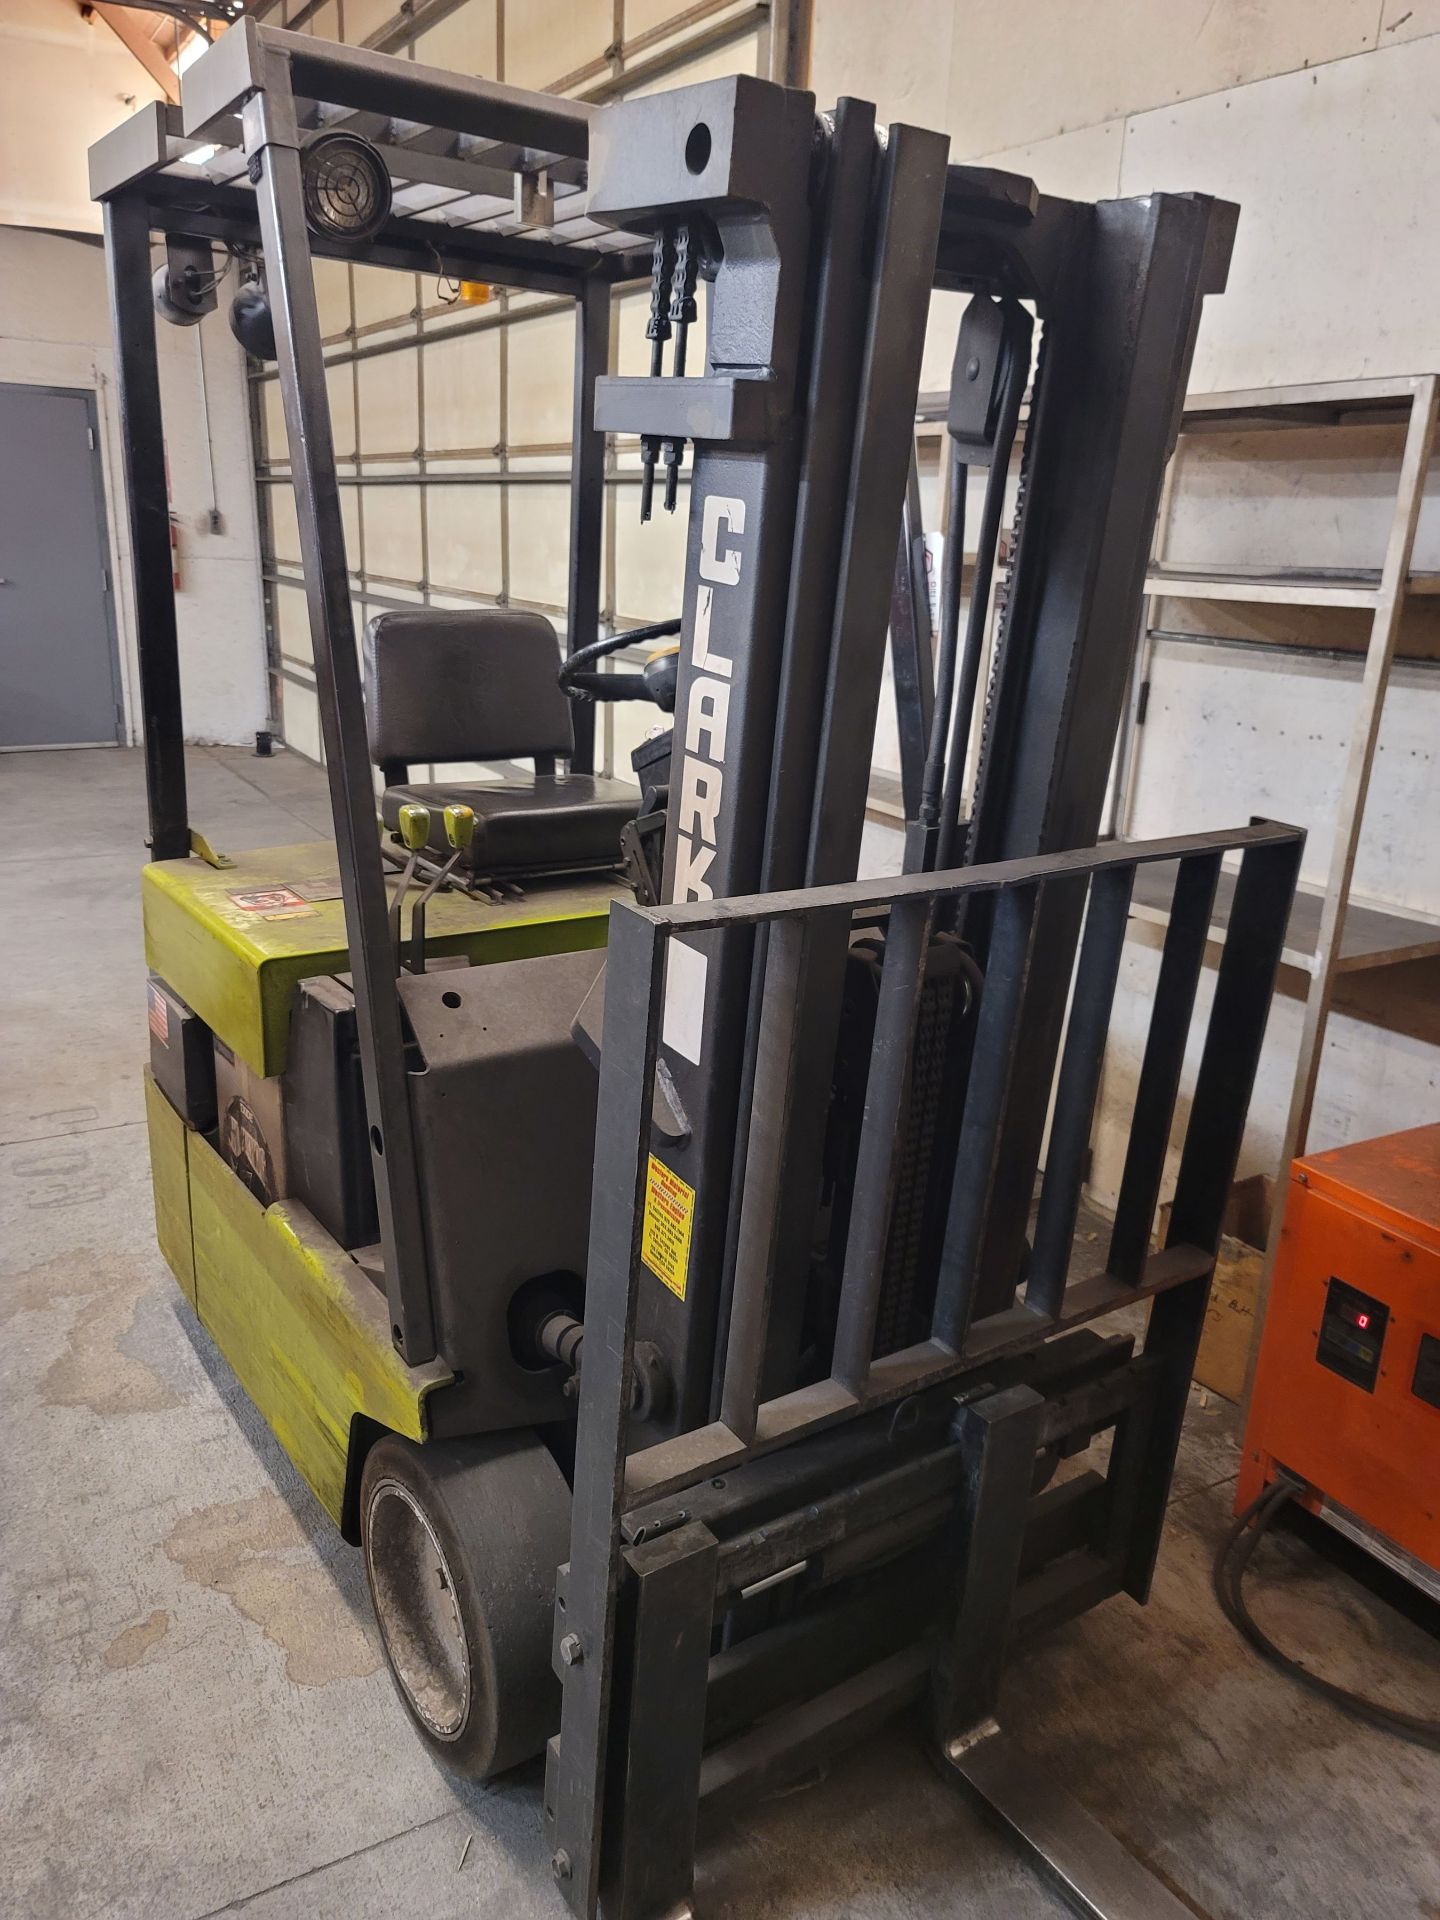 CLARK TM15S ELECTRIC FORKLIFT, 3,000 LB CAPACITY, 3-STAGE MAST, SIDE SHIFT, 188" LIFT HEIGHT,